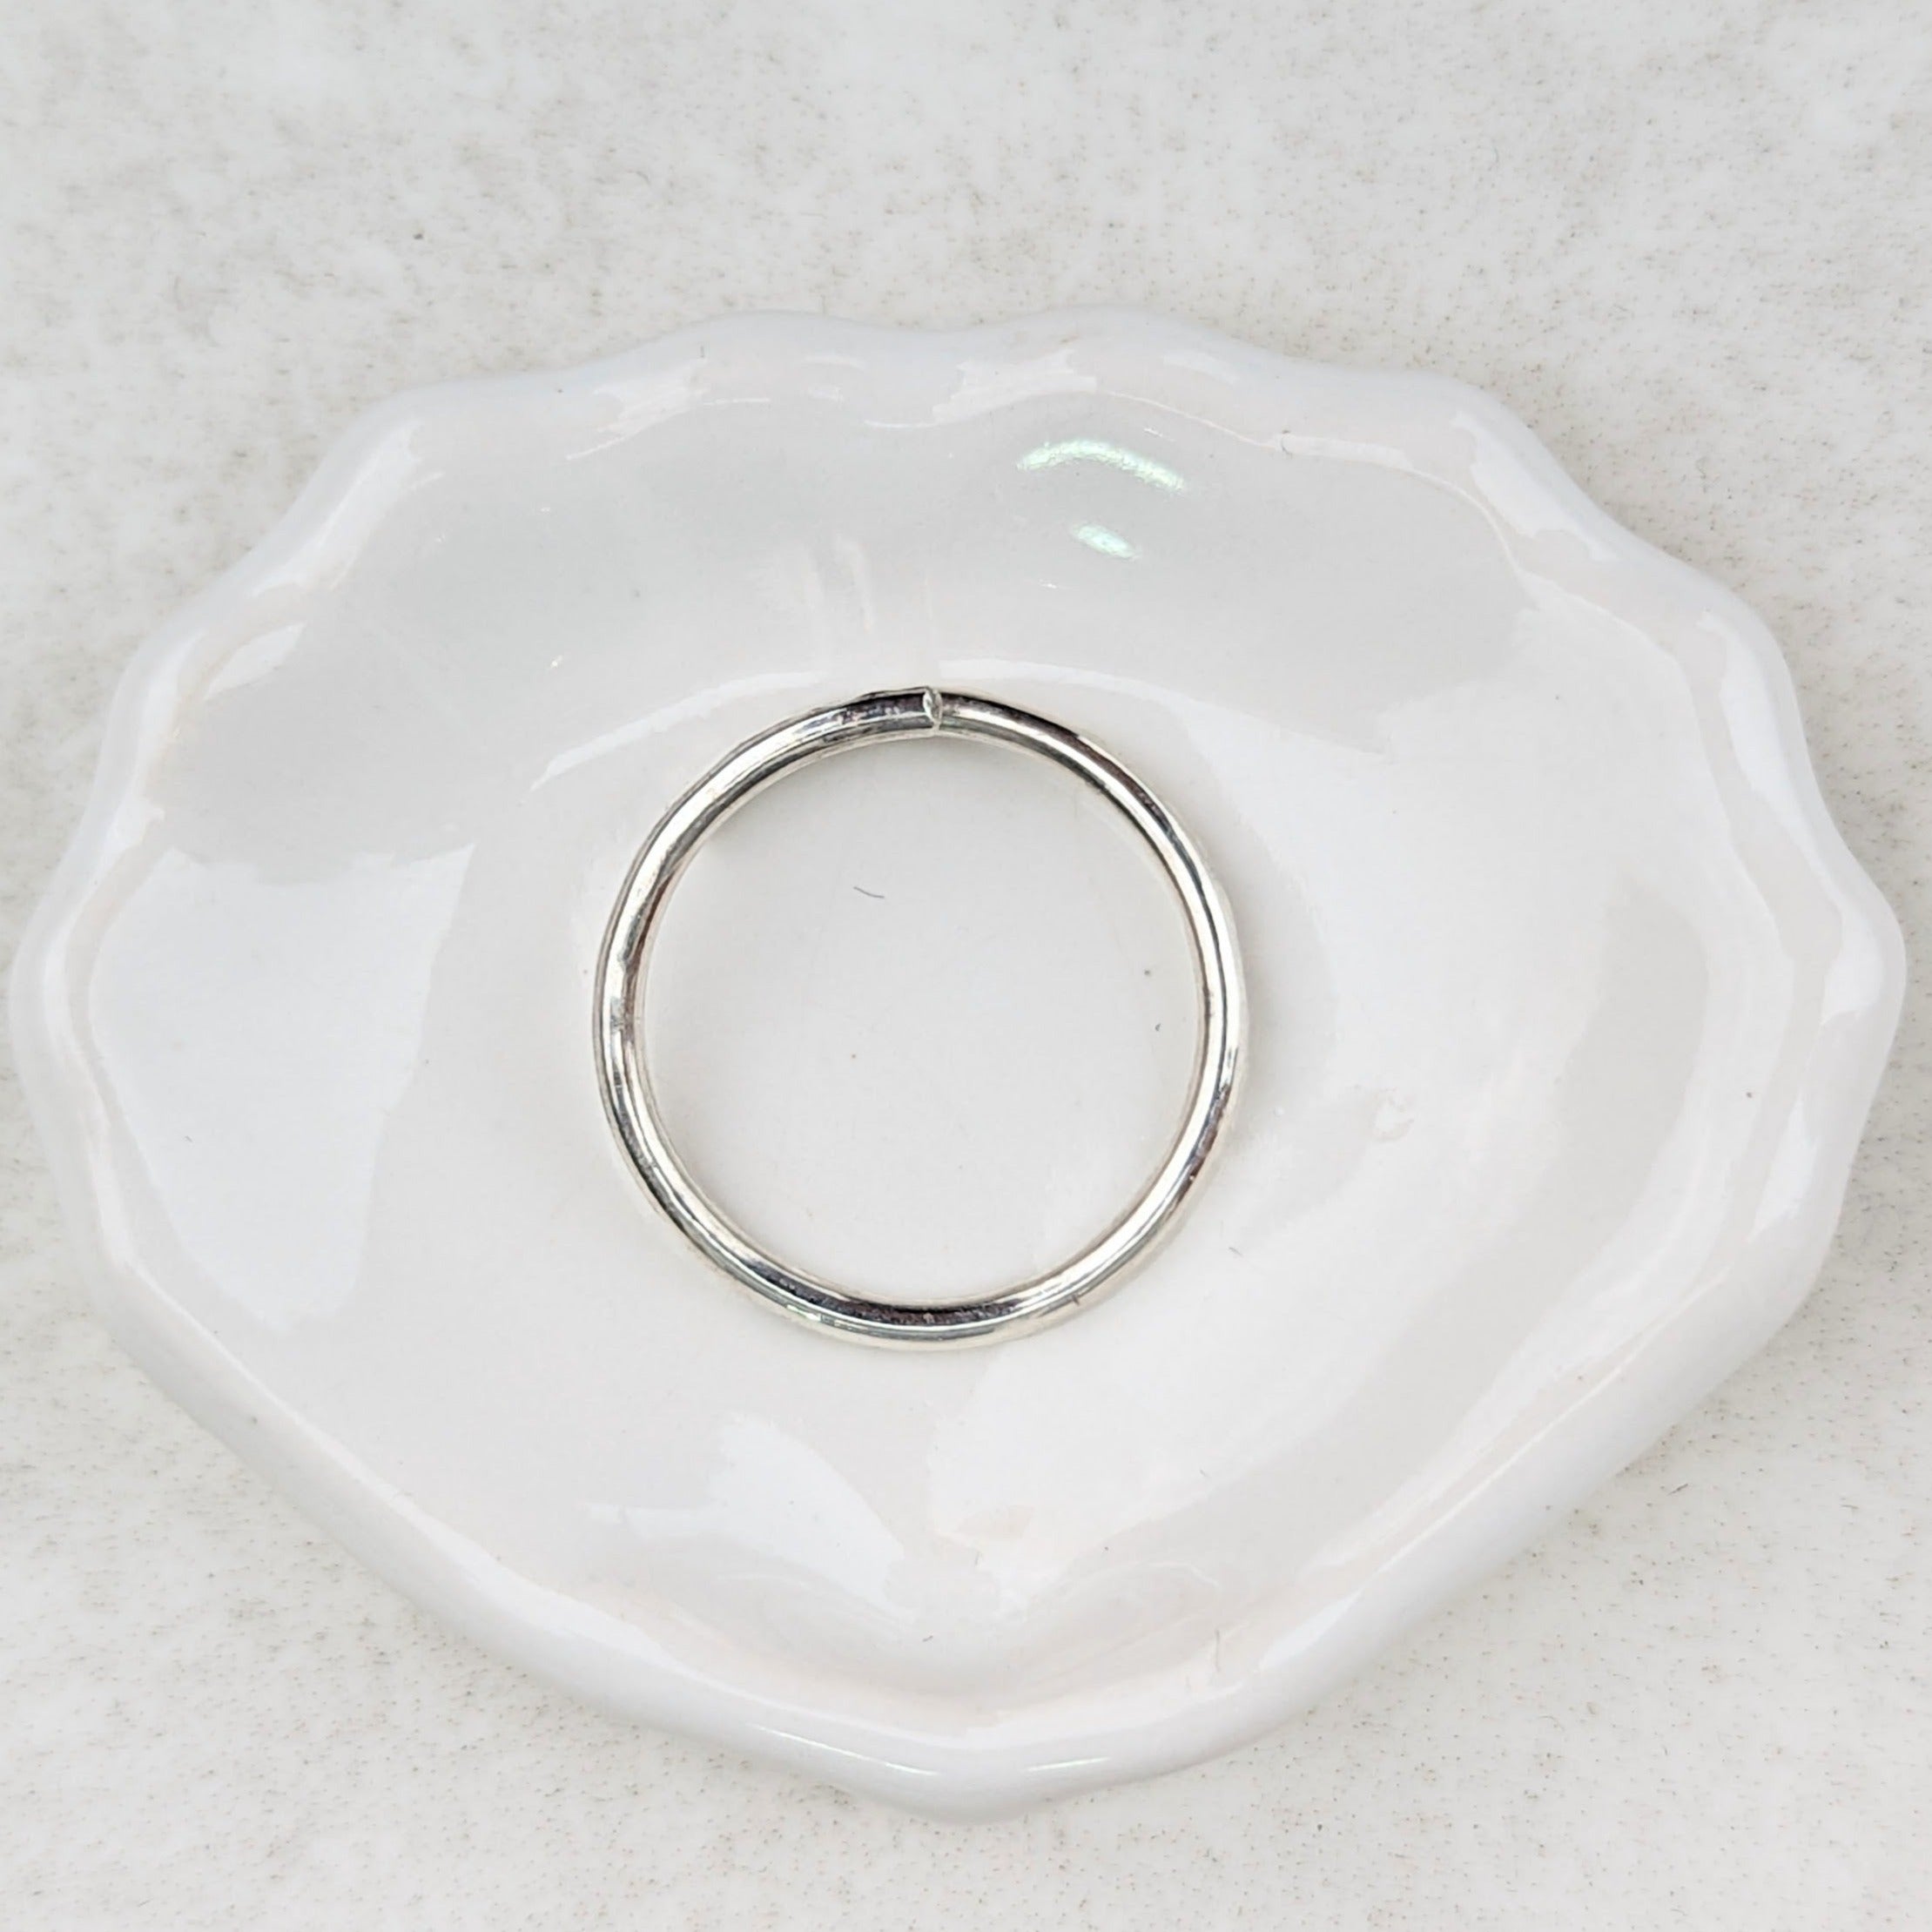 Silver ring from above